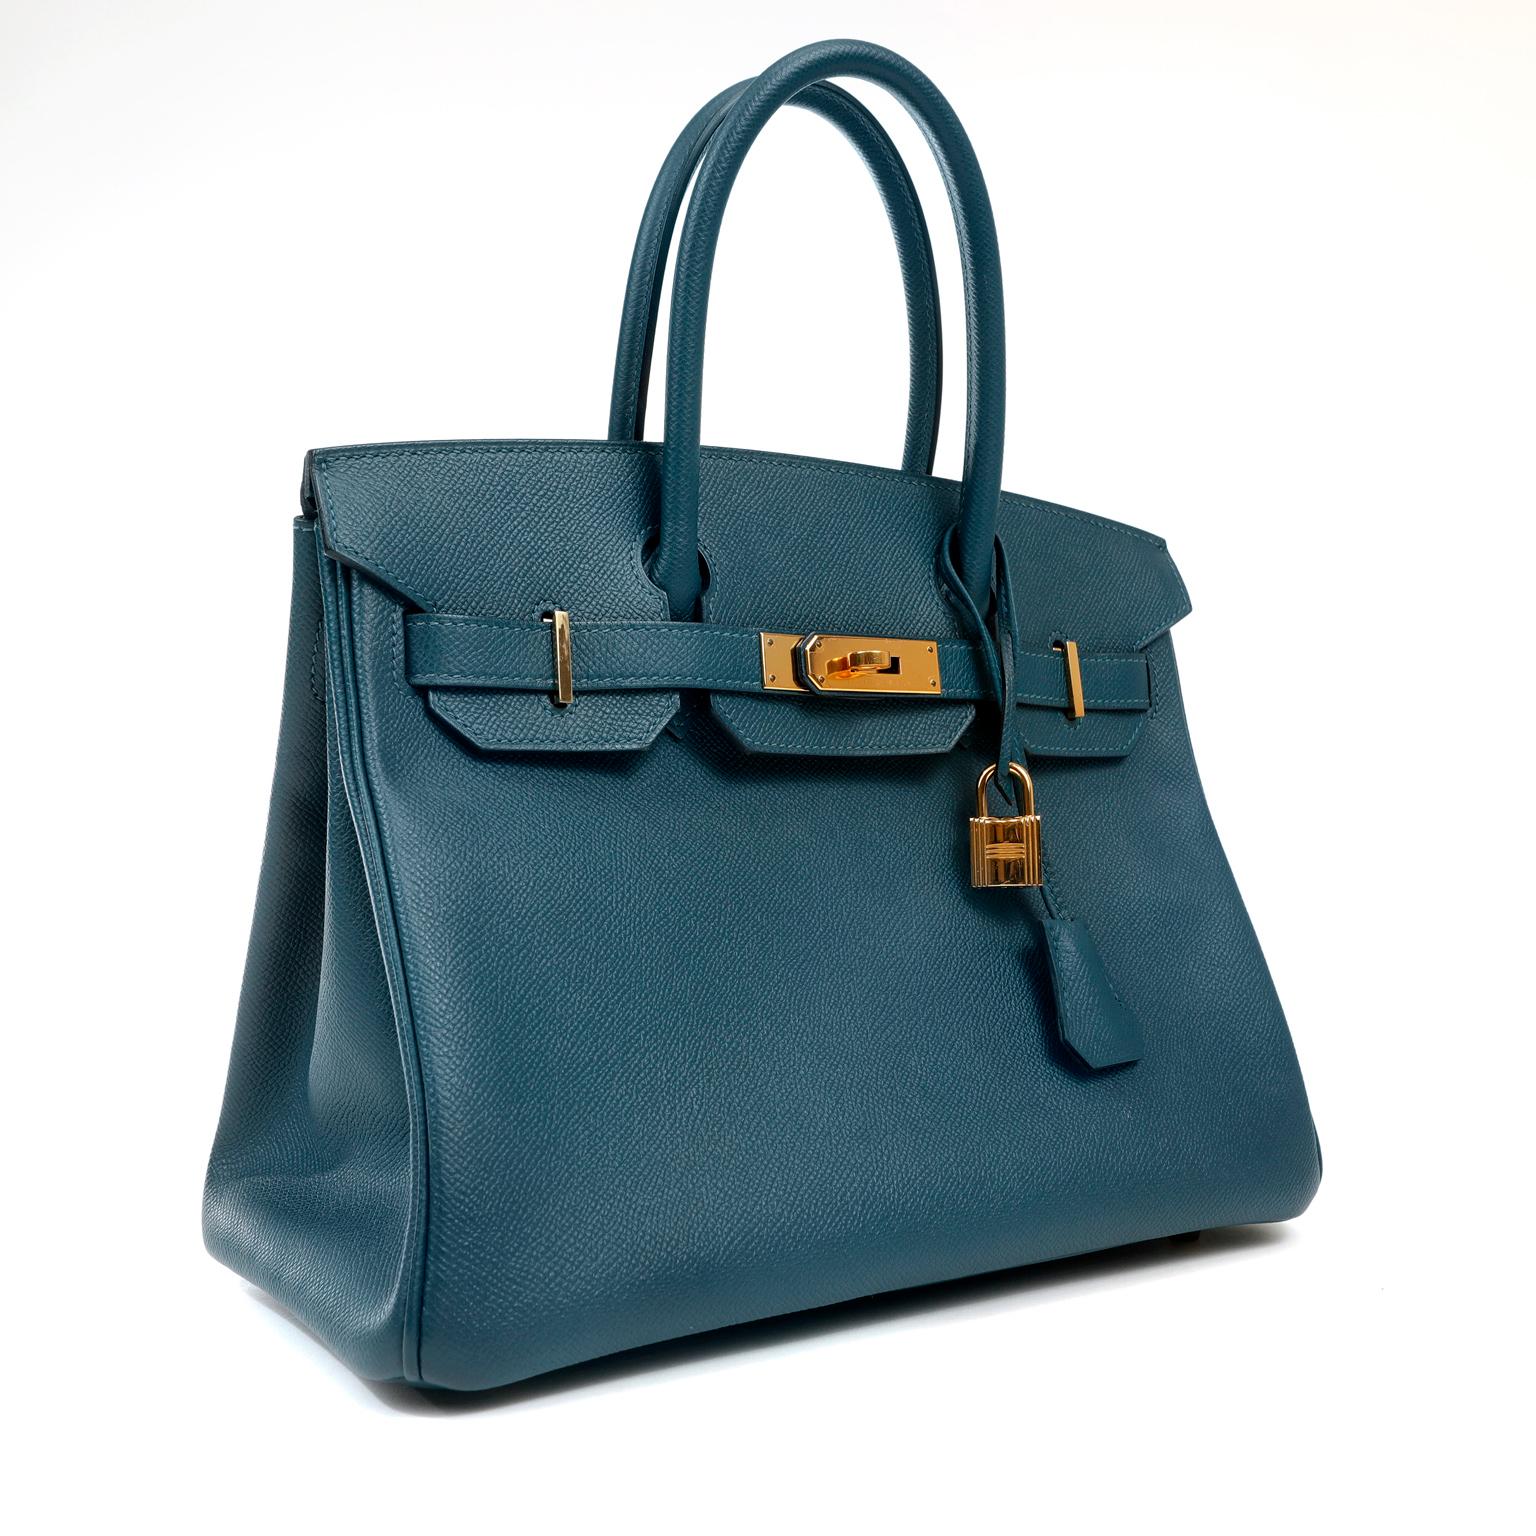 This authentic Hermès Deep Blue Epsom 30 cm Birkin is in excellent plus condition.  Considered the ultimate luxury item, the Hermès Birkin is stitched by hand and coveted worldwide.   
 Epsom leather is textured and scratch resistant with a light